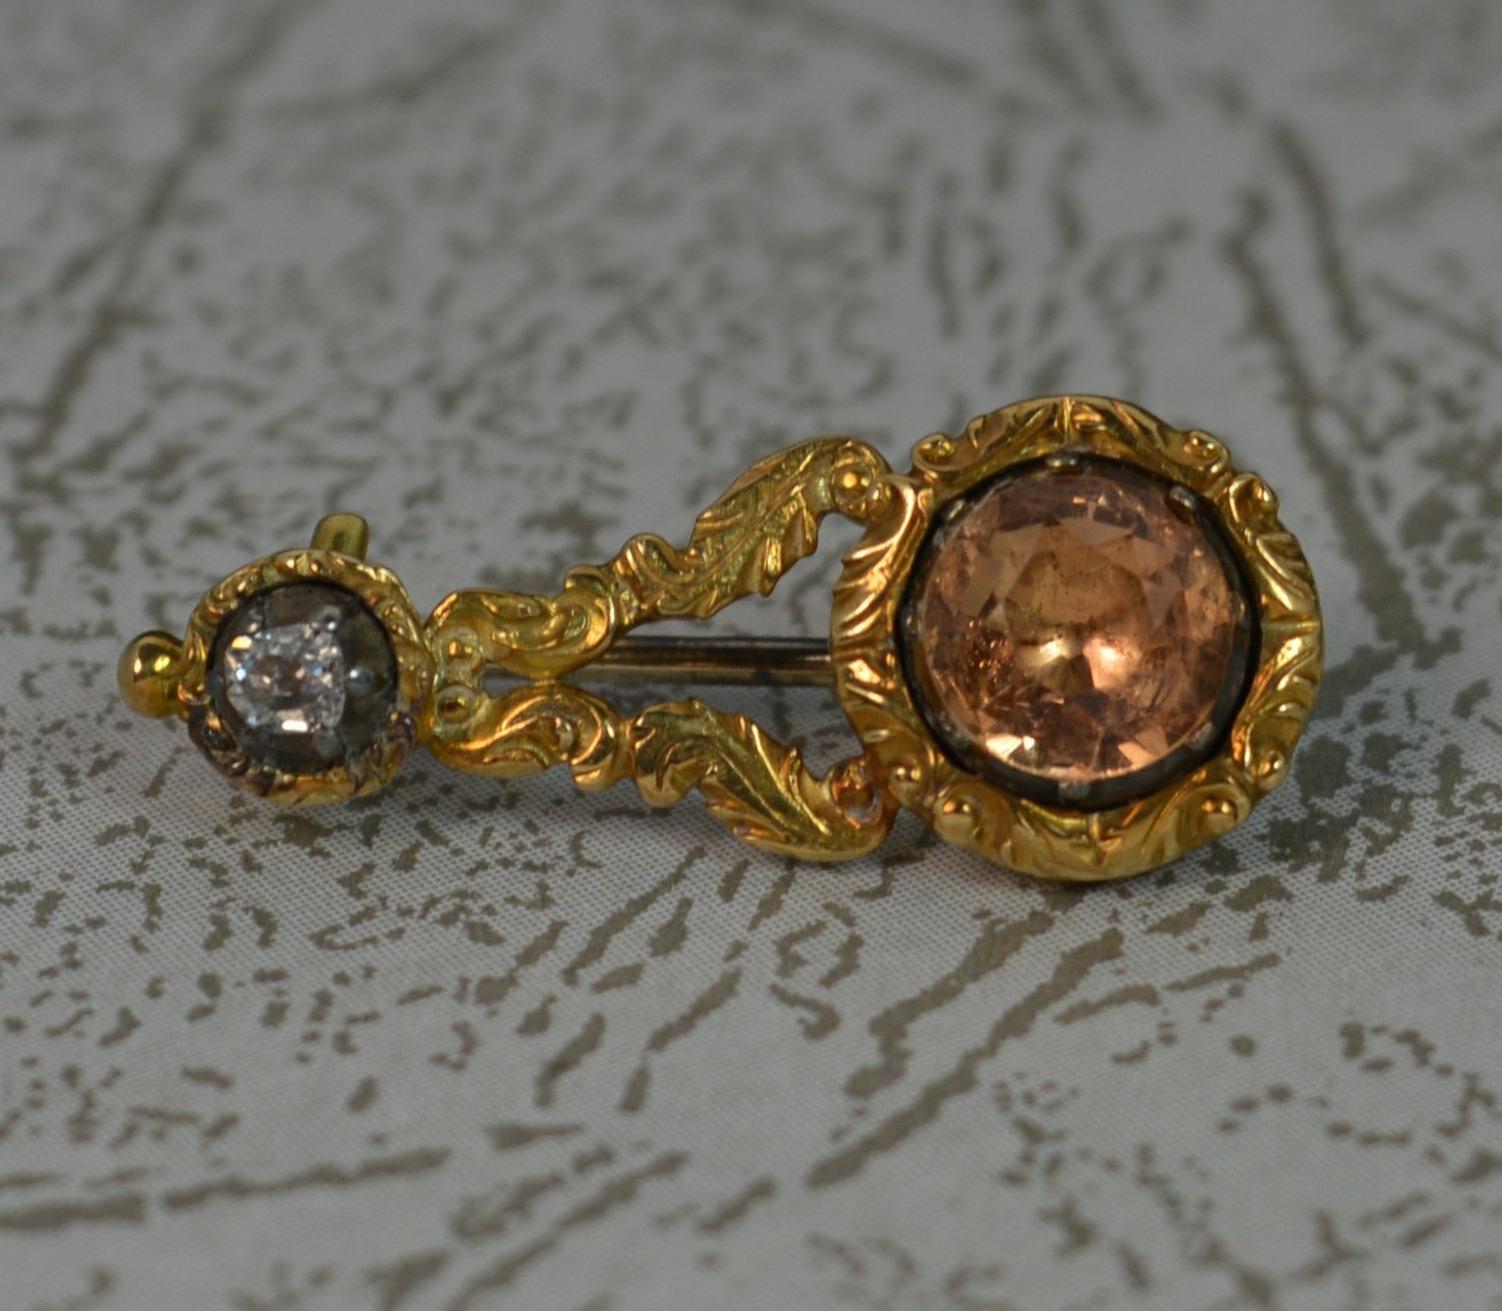 A stunning Georgian period brooch c1800. Halley's comet example. Solid 18 carat gold.
Designed with a circular closed foiled back topaz to one end and closed foil back old cut diamond the other. The centre with fine engraved floral